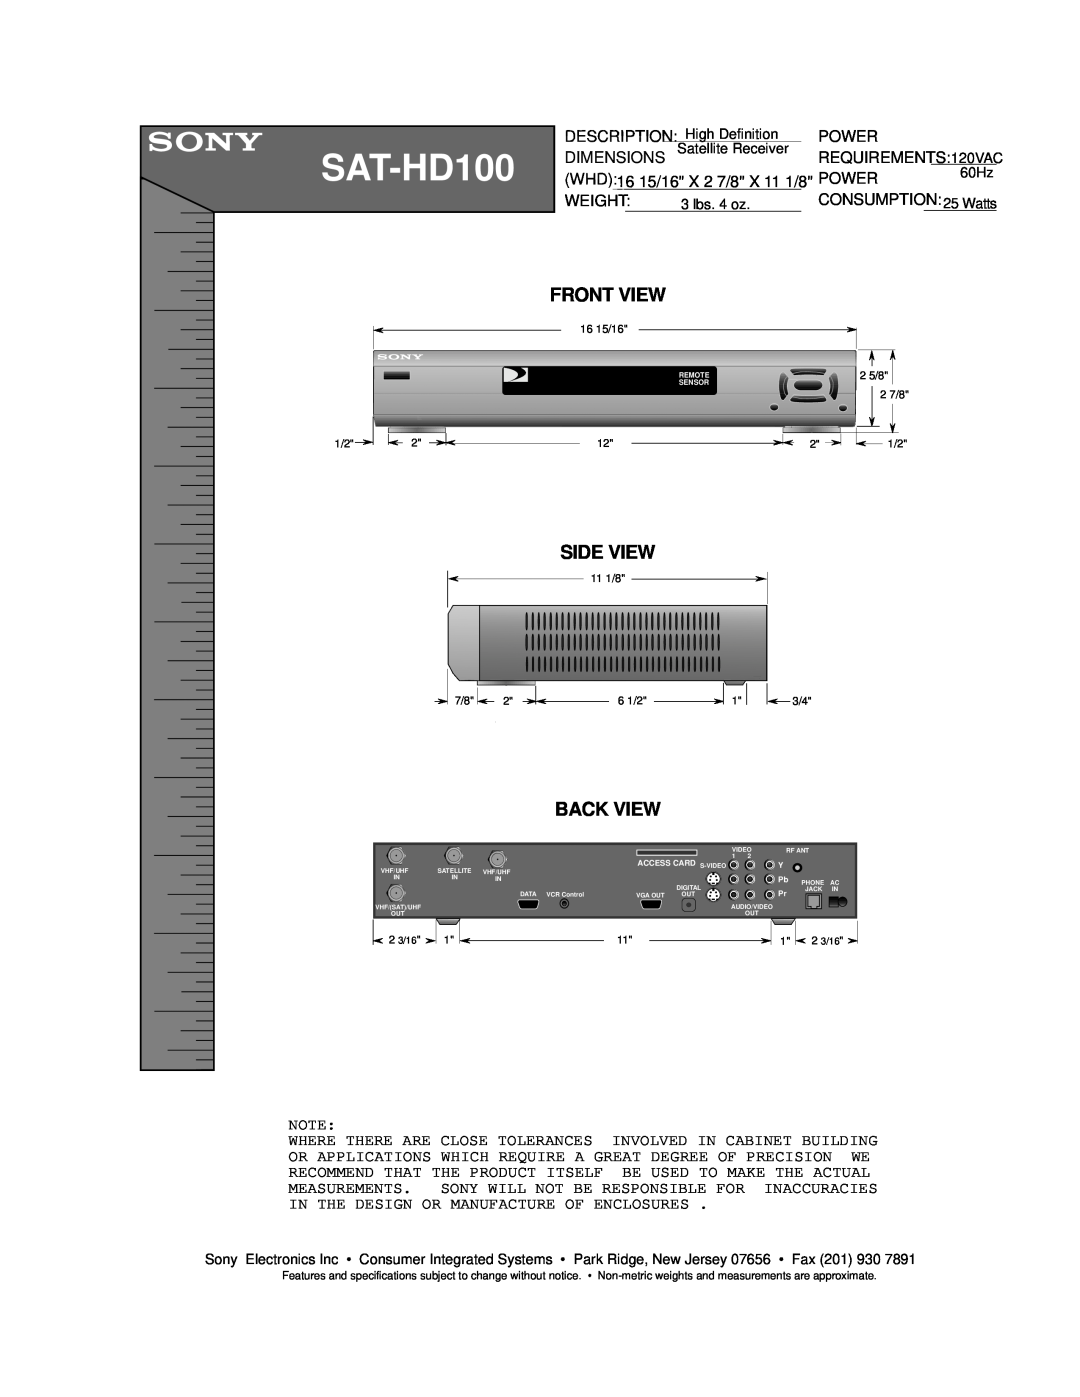 Sony SAT-HD100, Satellite Radio dimensions Front View, Side View, Back View, Model, Description, Weight 